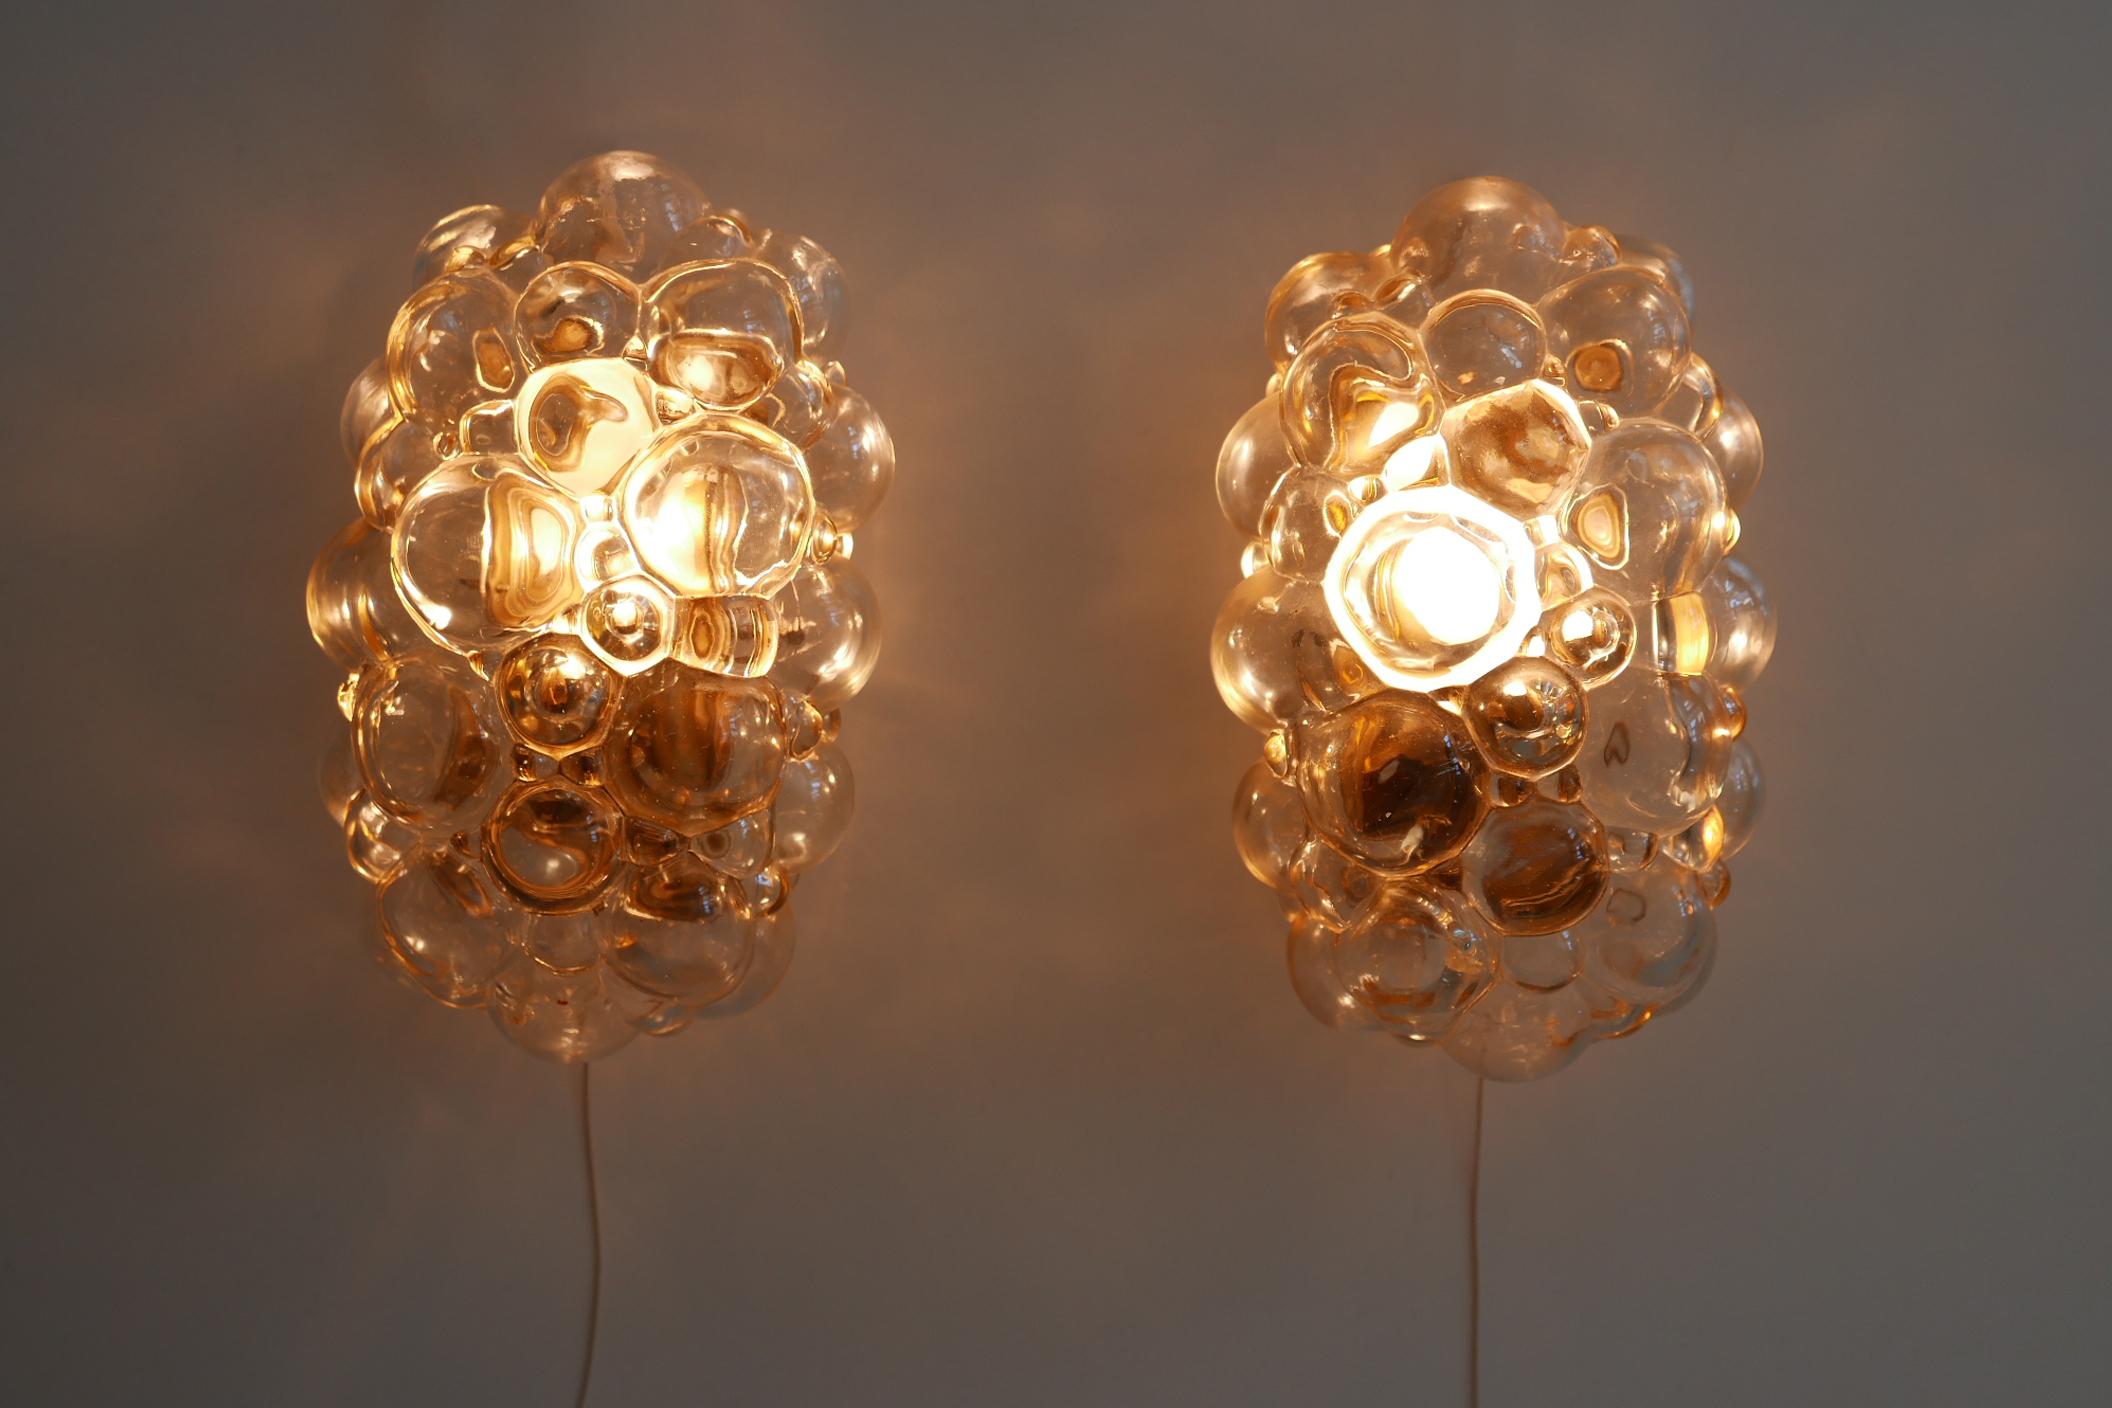 Amazing set of two Mid-Century Modern wall lamps or sconces. Designed by Helena Tynell for Glashütte Limburg, 1950s, Germany.

Executed in amber-colored bubble glass and brass sheet, each lamp comes with 1 x E14 Edison screw fit bulb holder, is